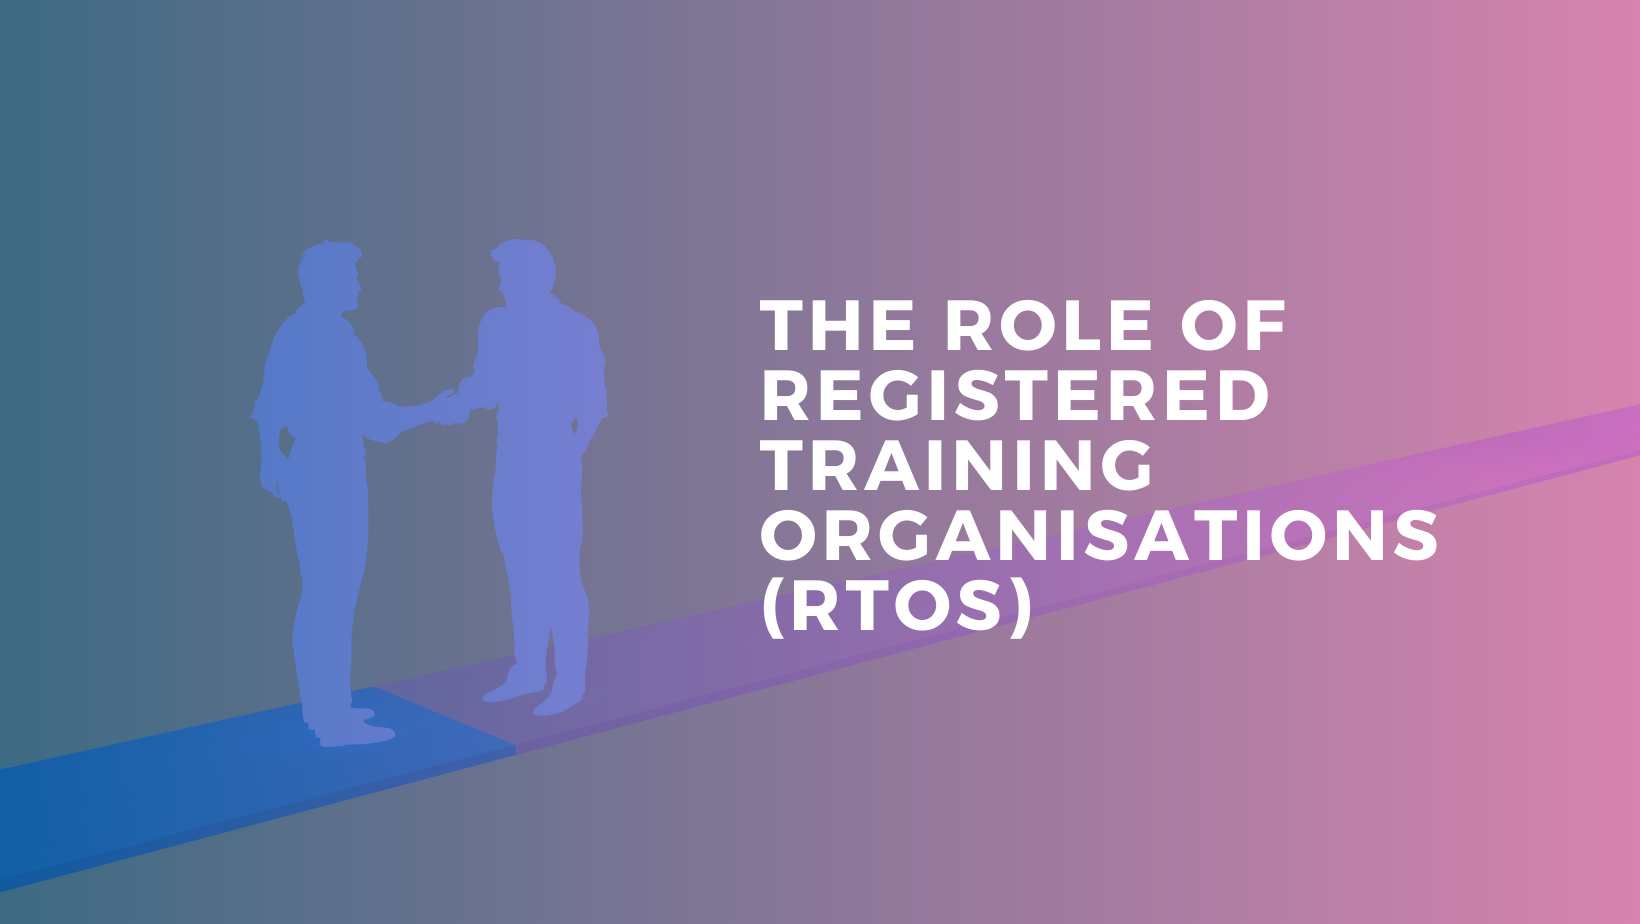 The Role of Registered Training Organisations (RTOs)